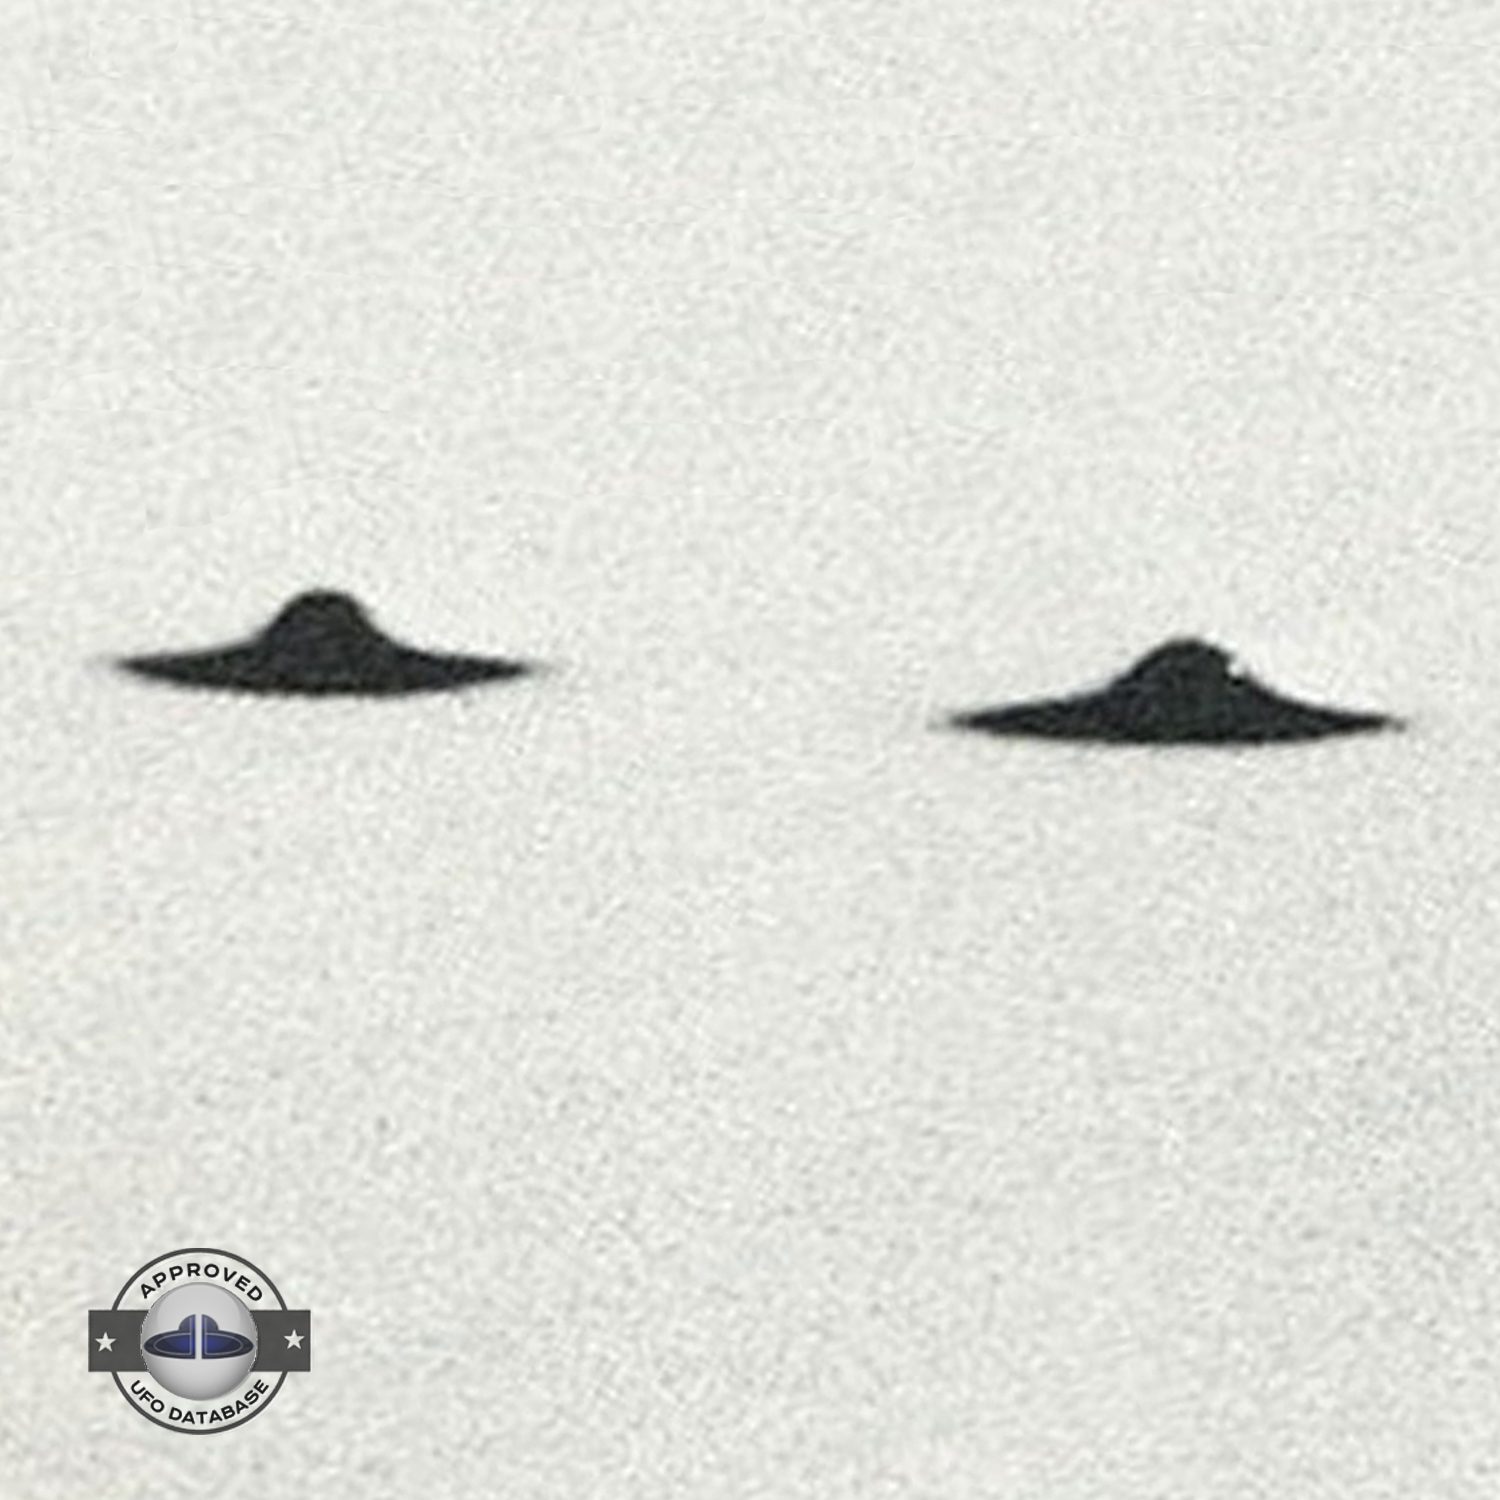 UFO picture lack of three dimensional aspect. 3 UFOs are very similar UFO Picture #136-4